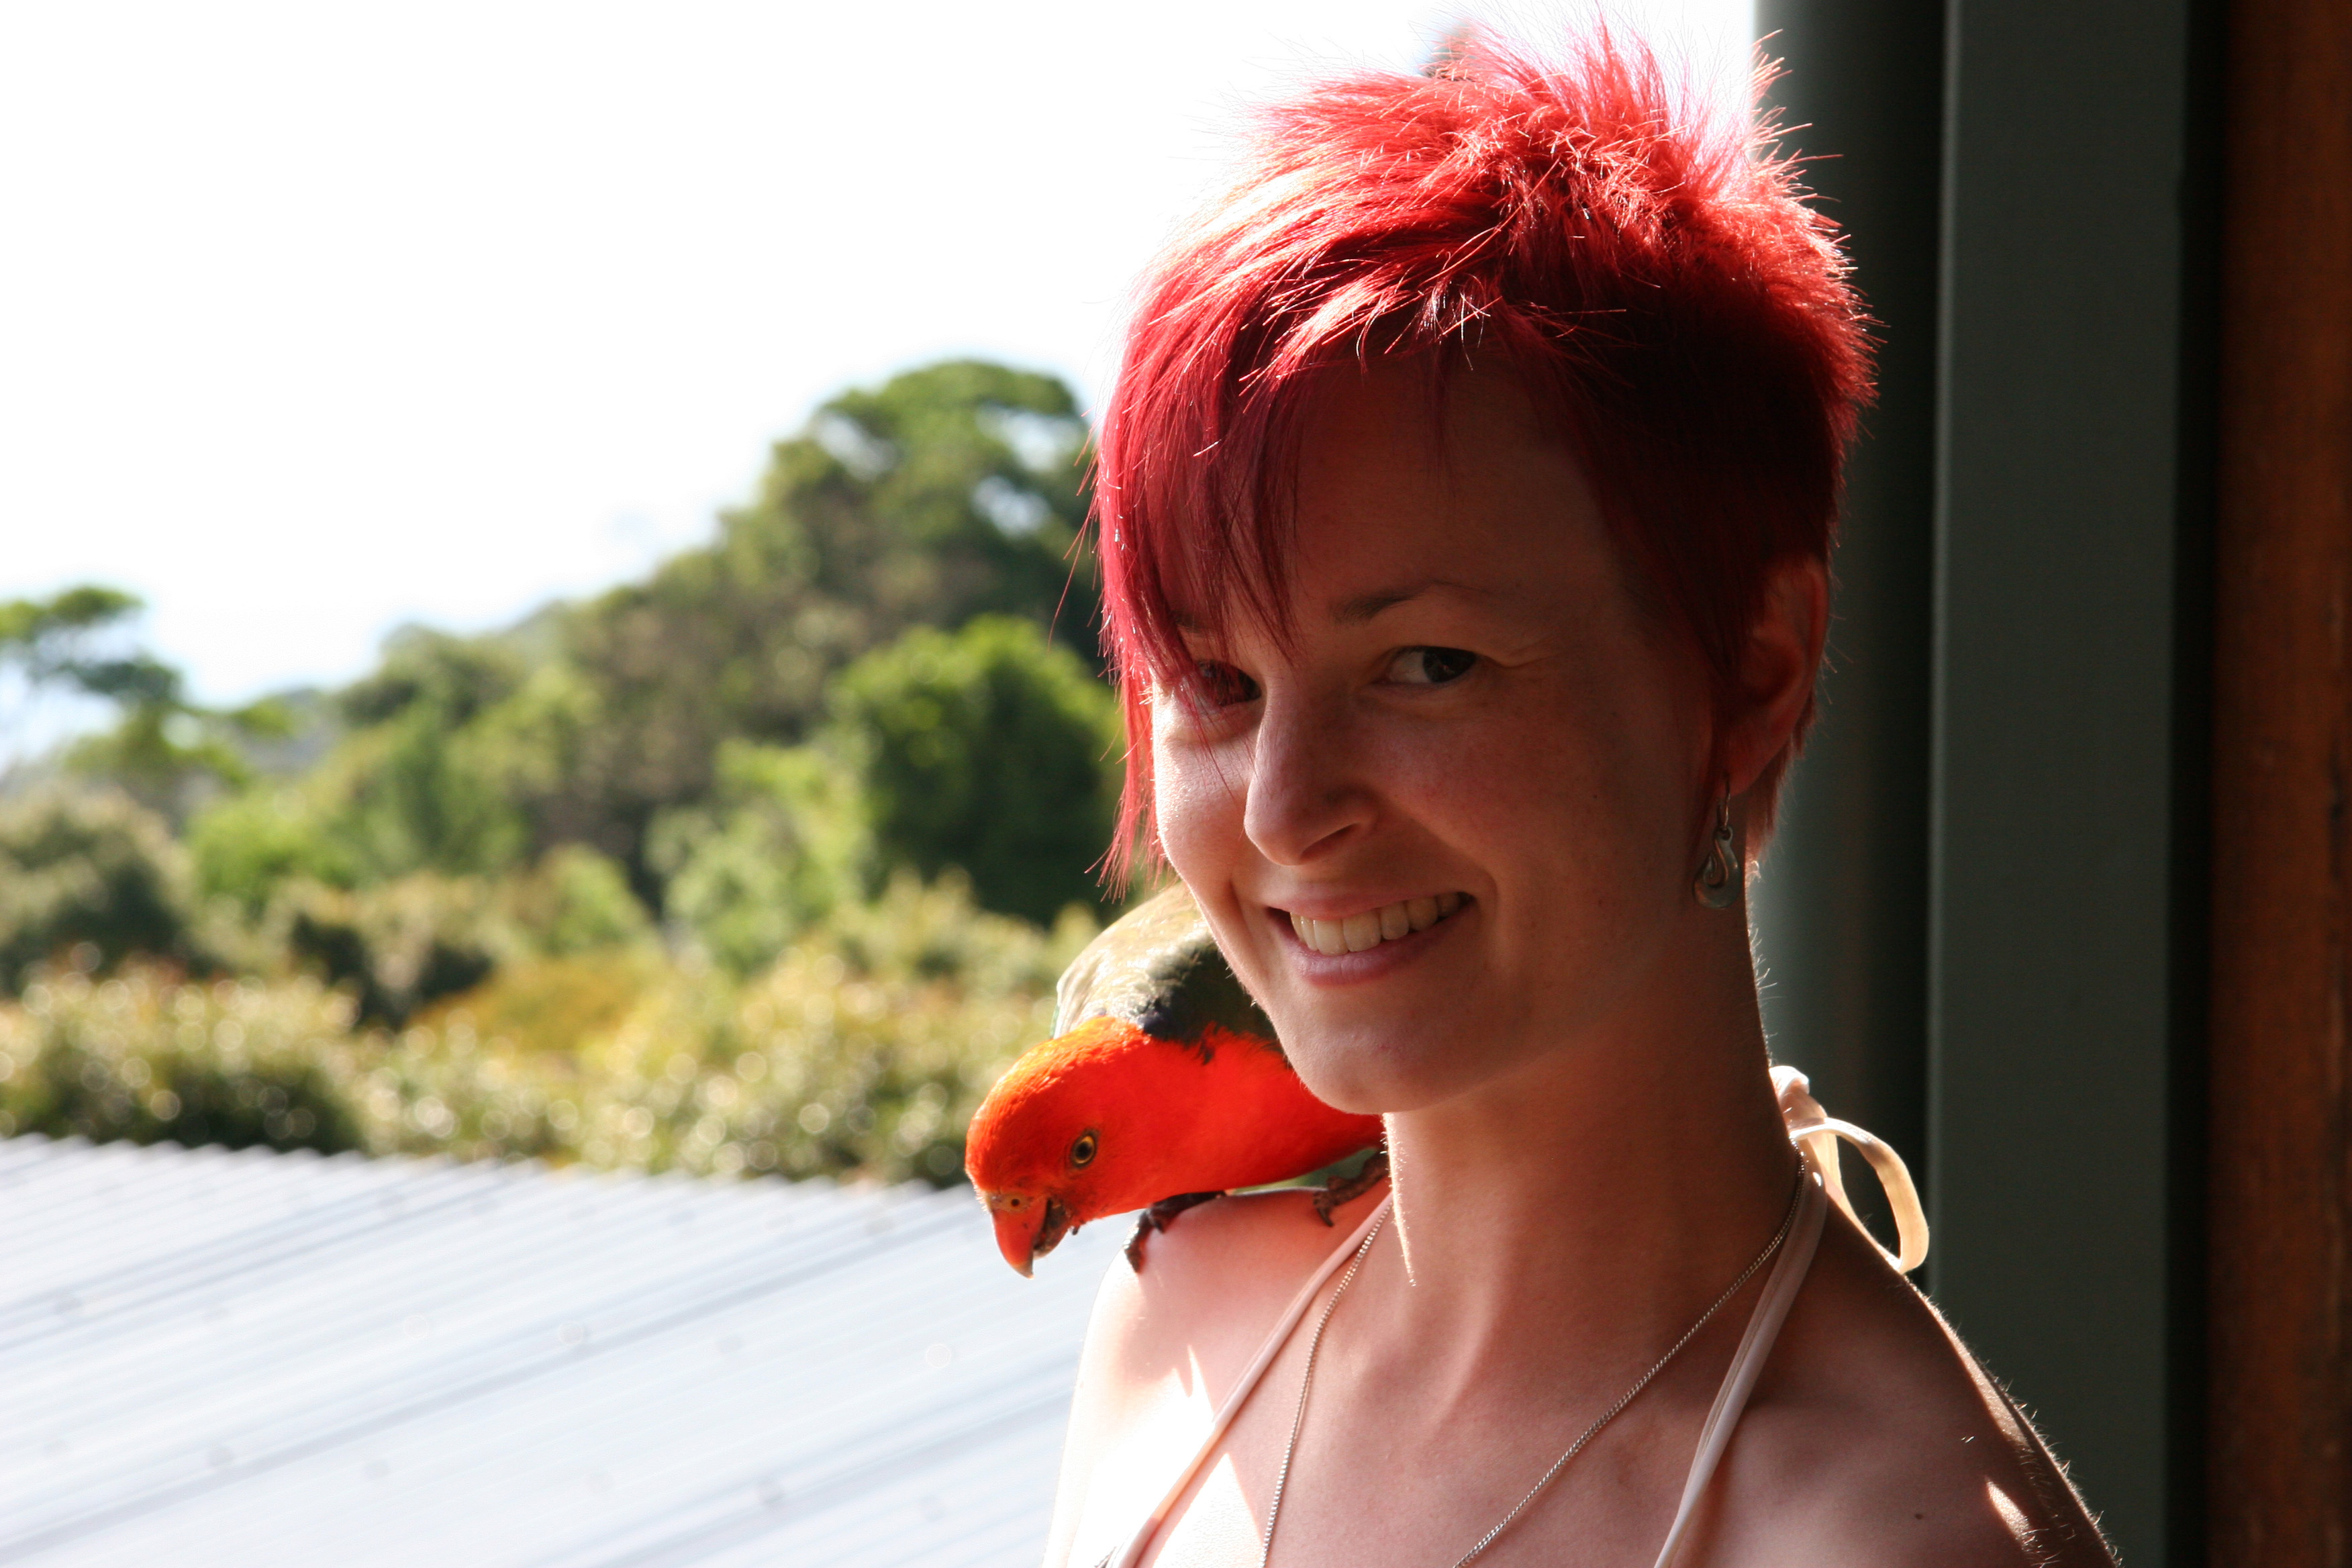 A portrait of Jessica Obersby, a woman with pale skin and bright red hair. She is smiling and has a little parrot on her shoulder